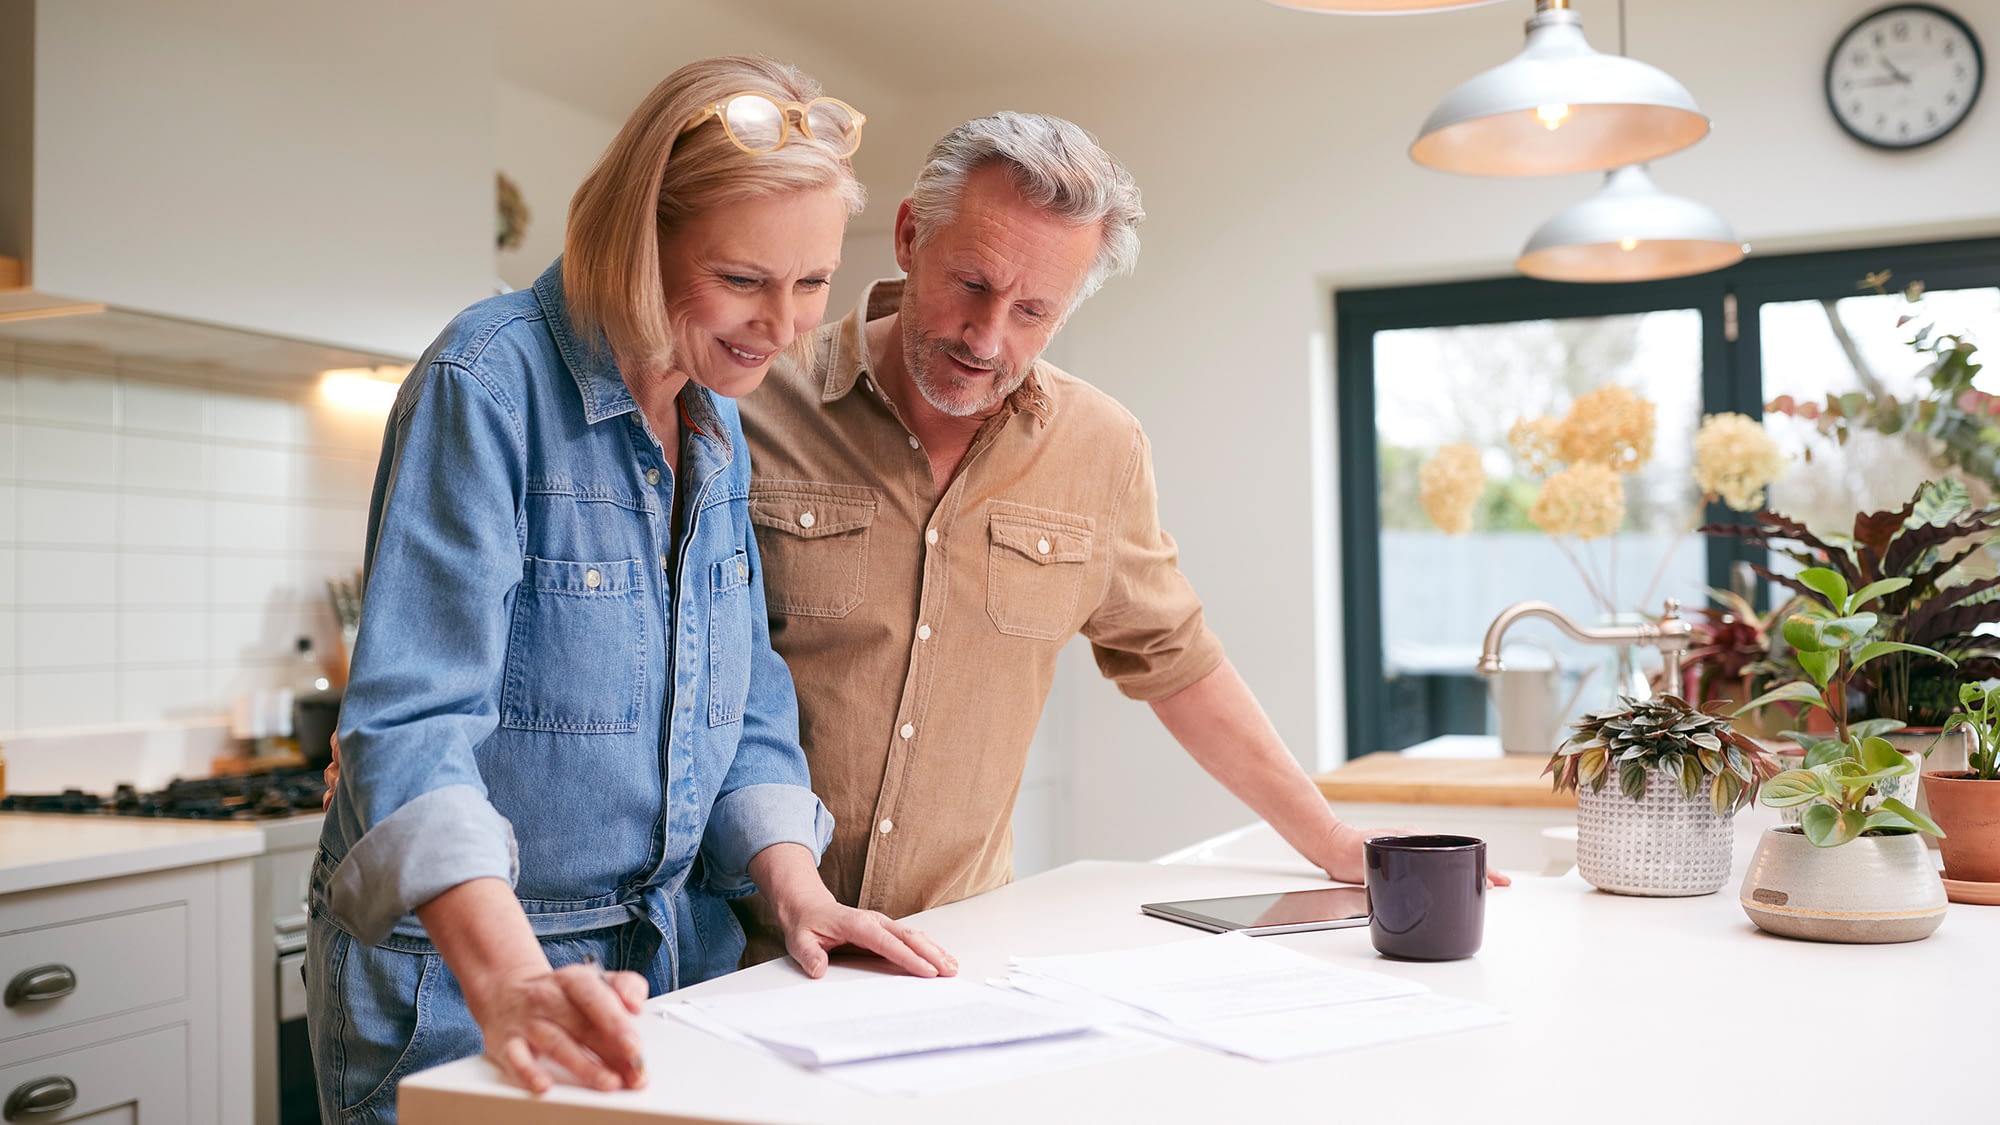 Mature couple reviewing universal life paperwork in their kitchen.